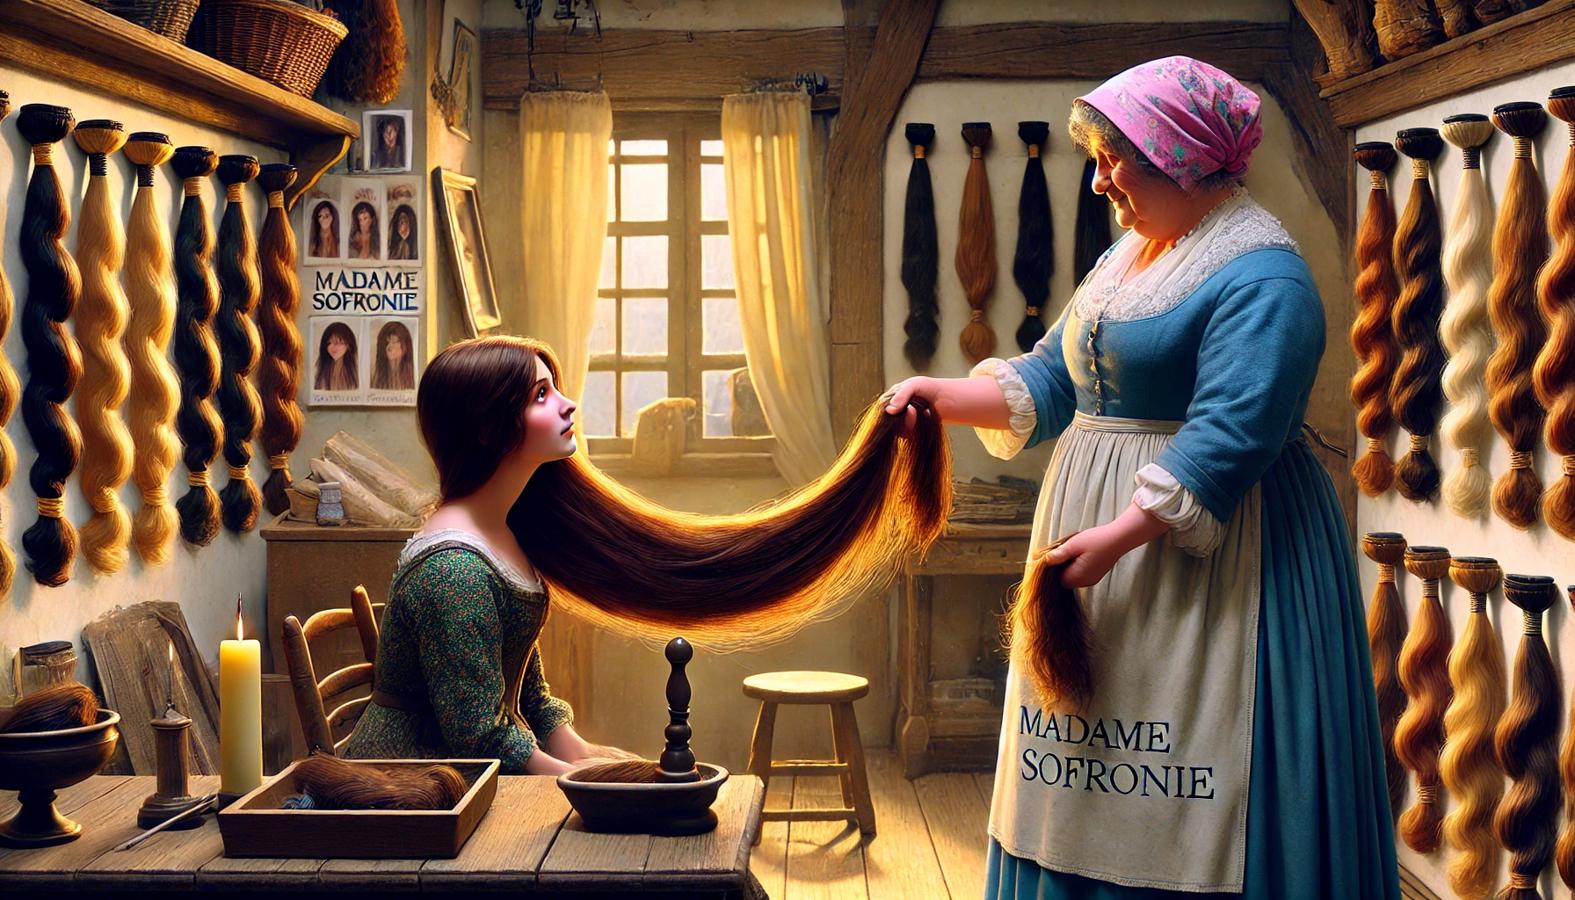 Della selling her long hair to Madame Sofronie in a small shop with hair goods displayed.